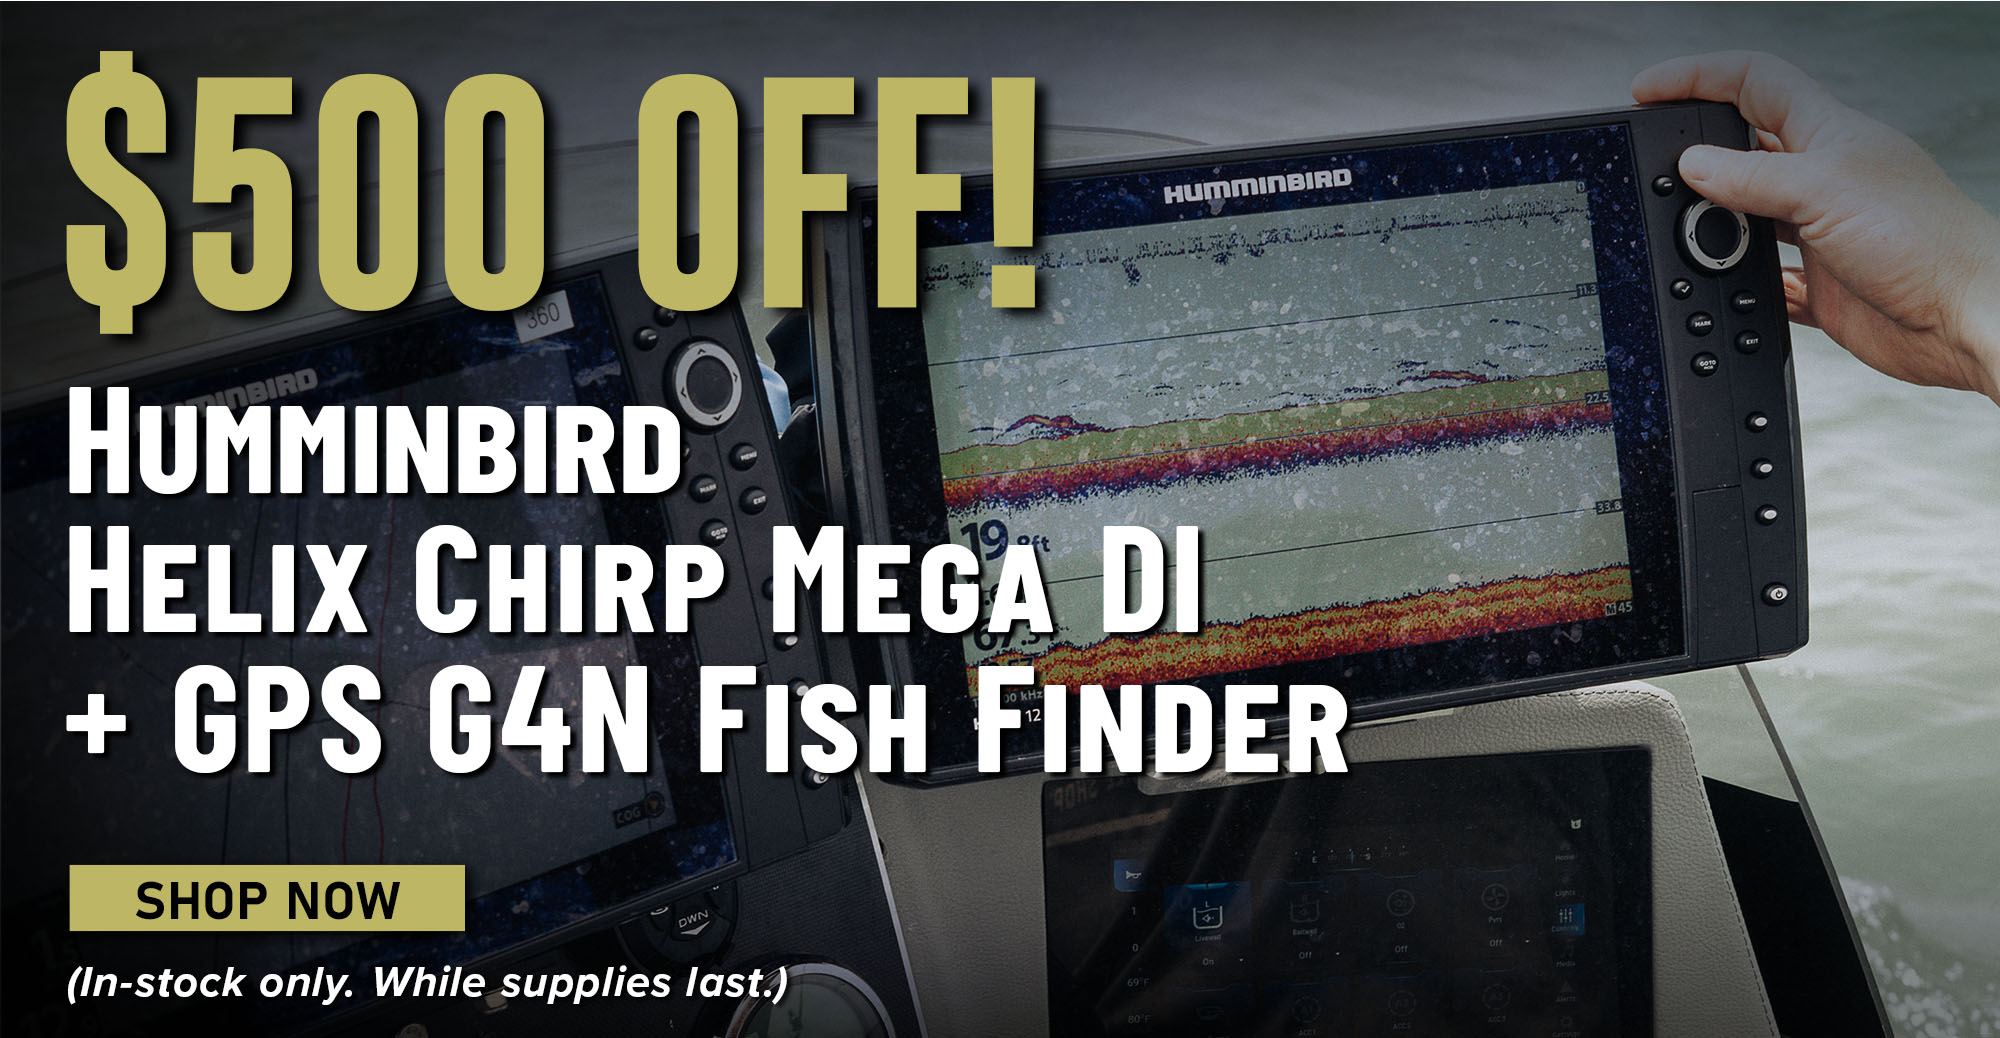 $500 Off! Humminbird Helix Chirp Mega DI+ GPS G4N Fish Finder Shop Now (In-stock only. While supplies last.)